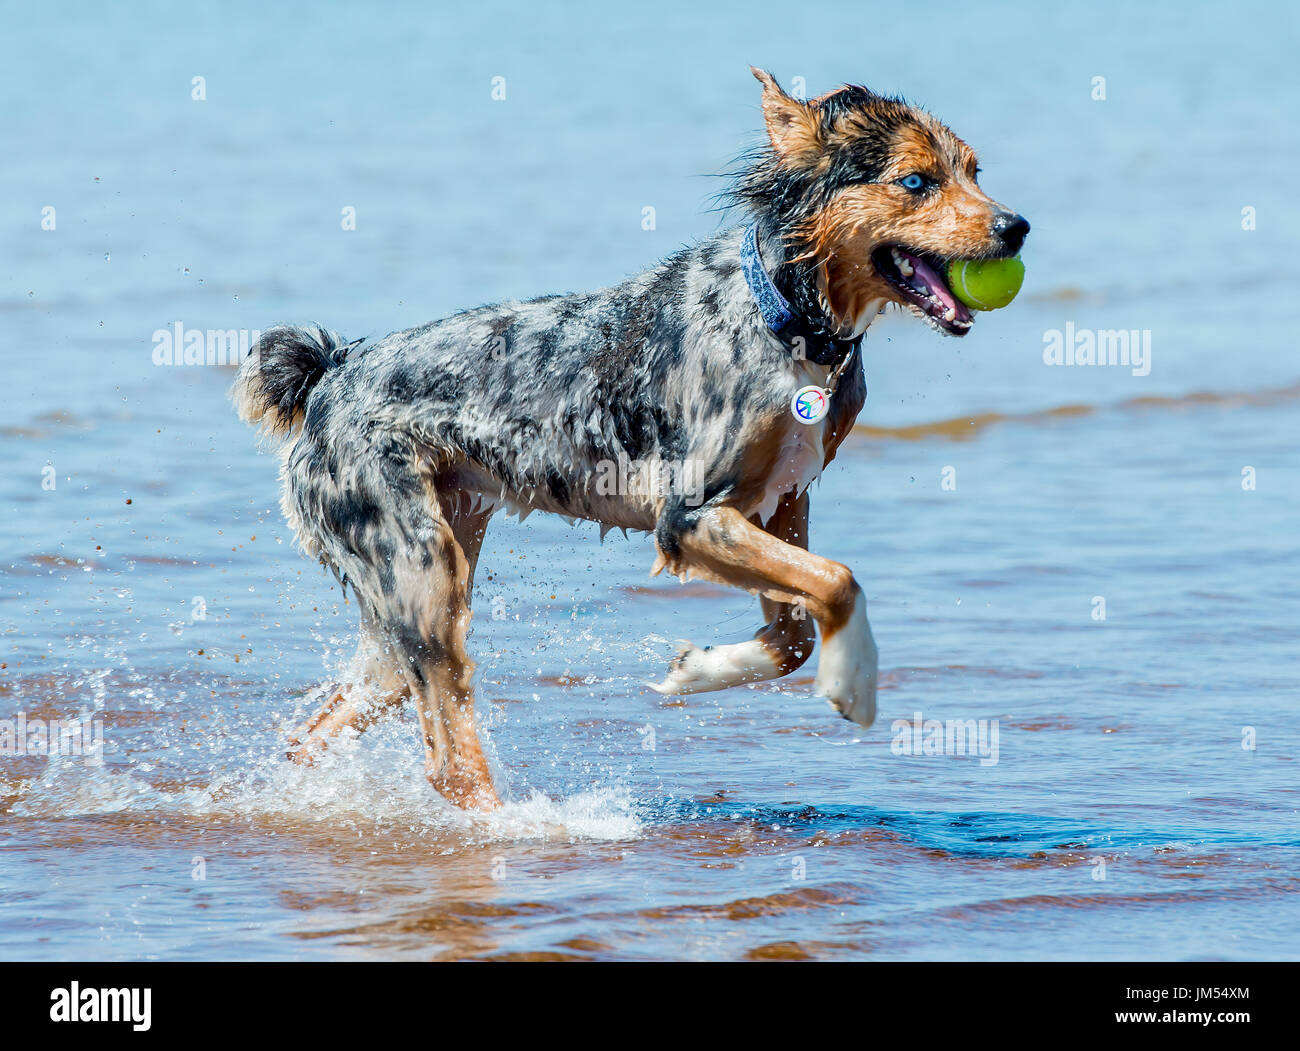 Beautiful, stunning tri color Australian Shepherd dog running and playing with tennis ball in mouth in shallow ocean water Stock Photo